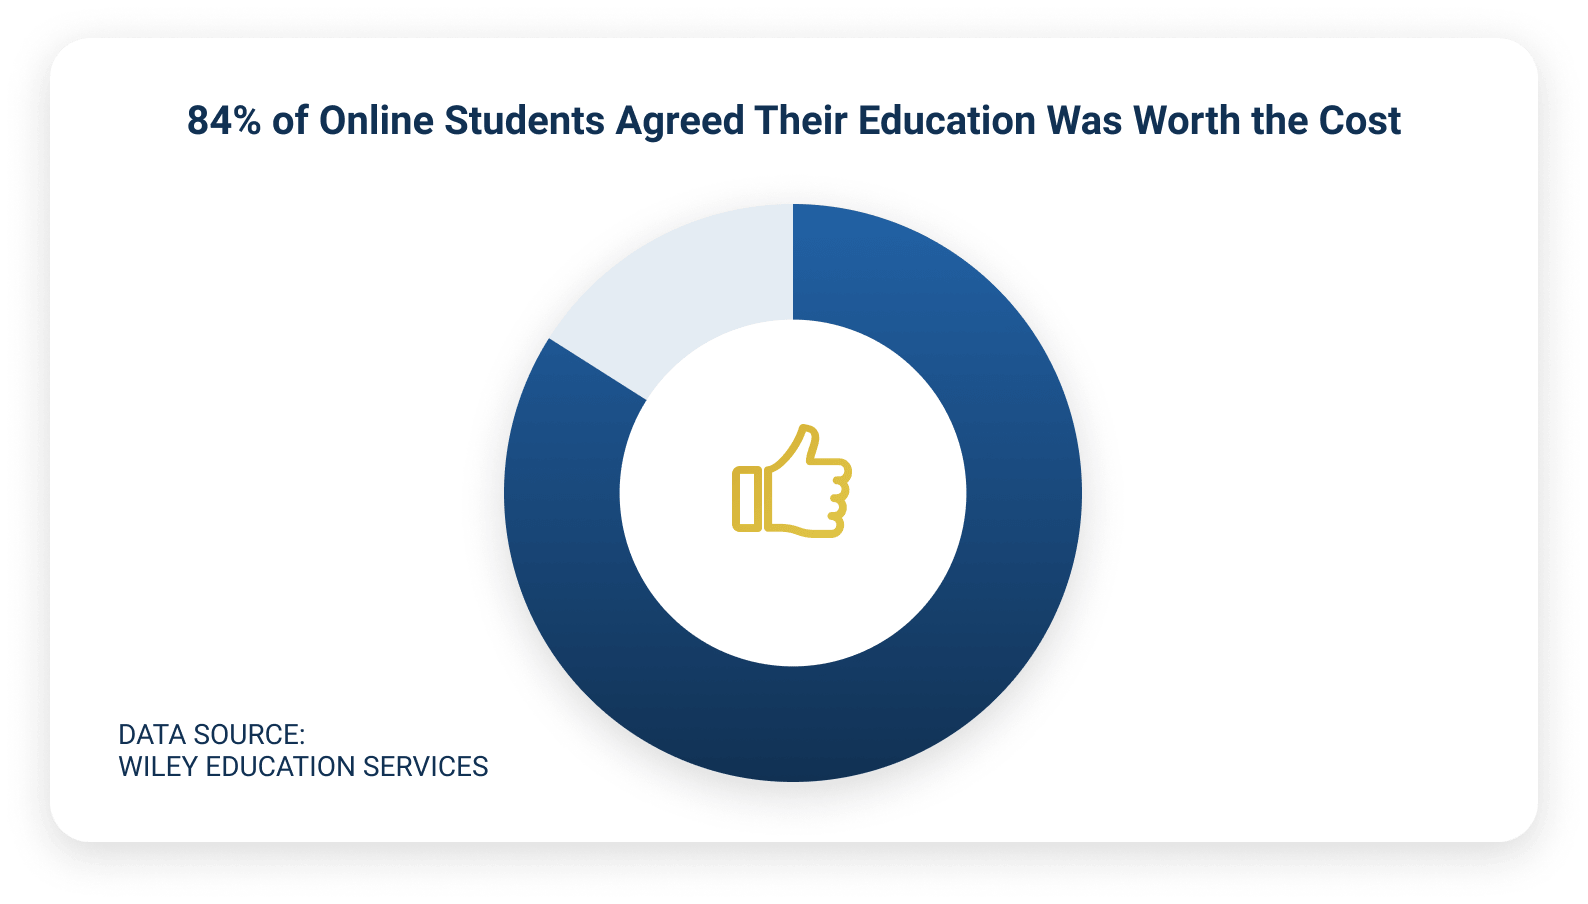 84% of Students Agreed Their Online Education Was Worth the Cost Pie Chart